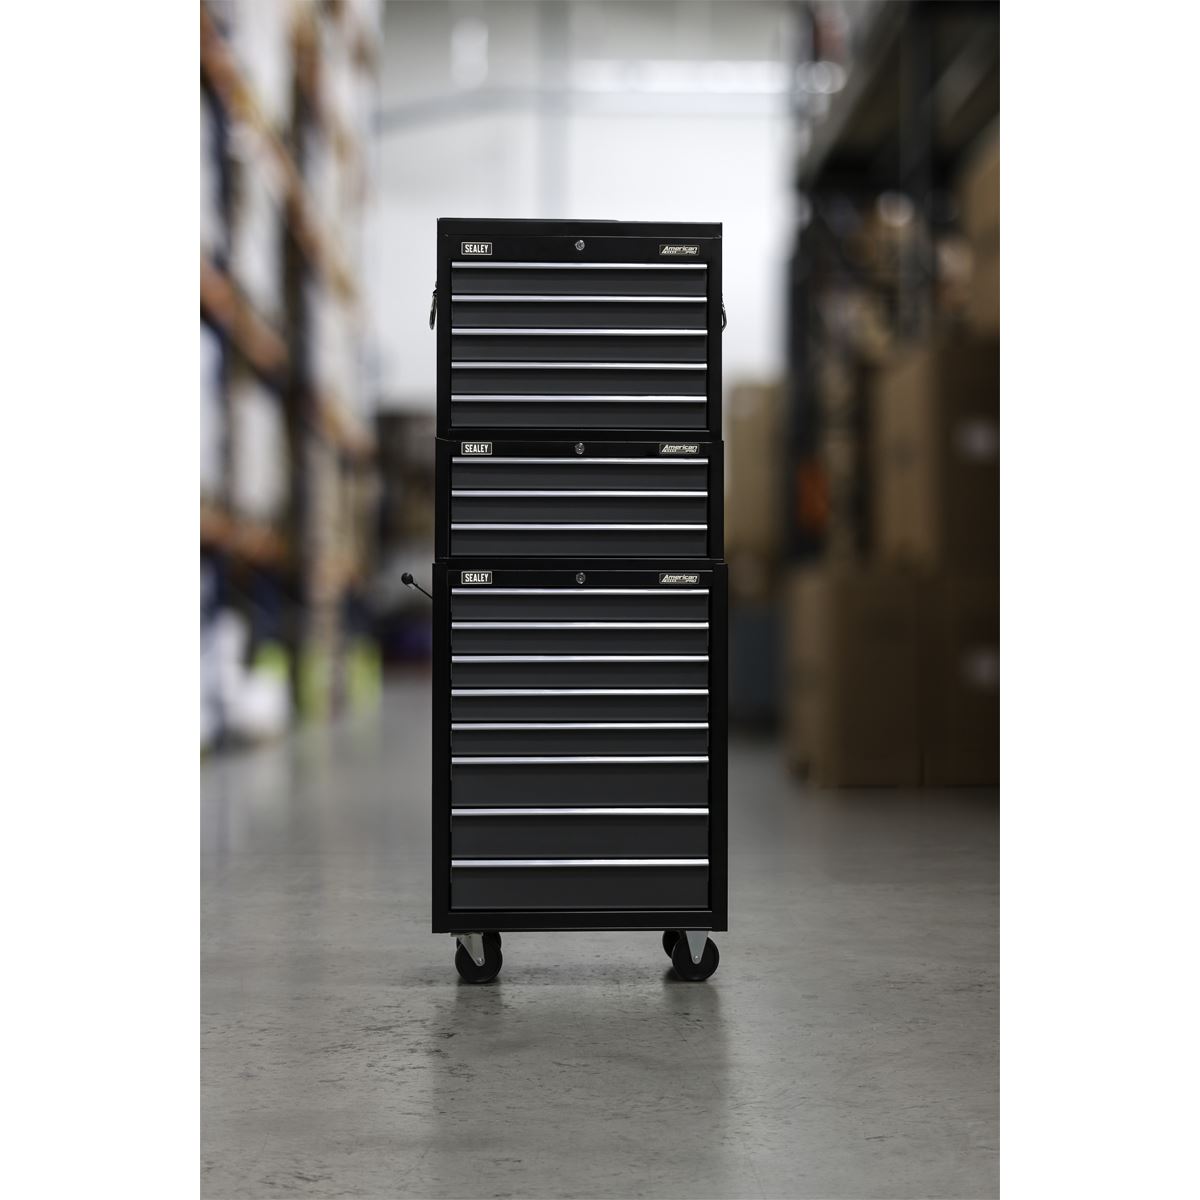 Sealey Tool Chest Combination 16 Drawer - Black/Grey AP35STACK